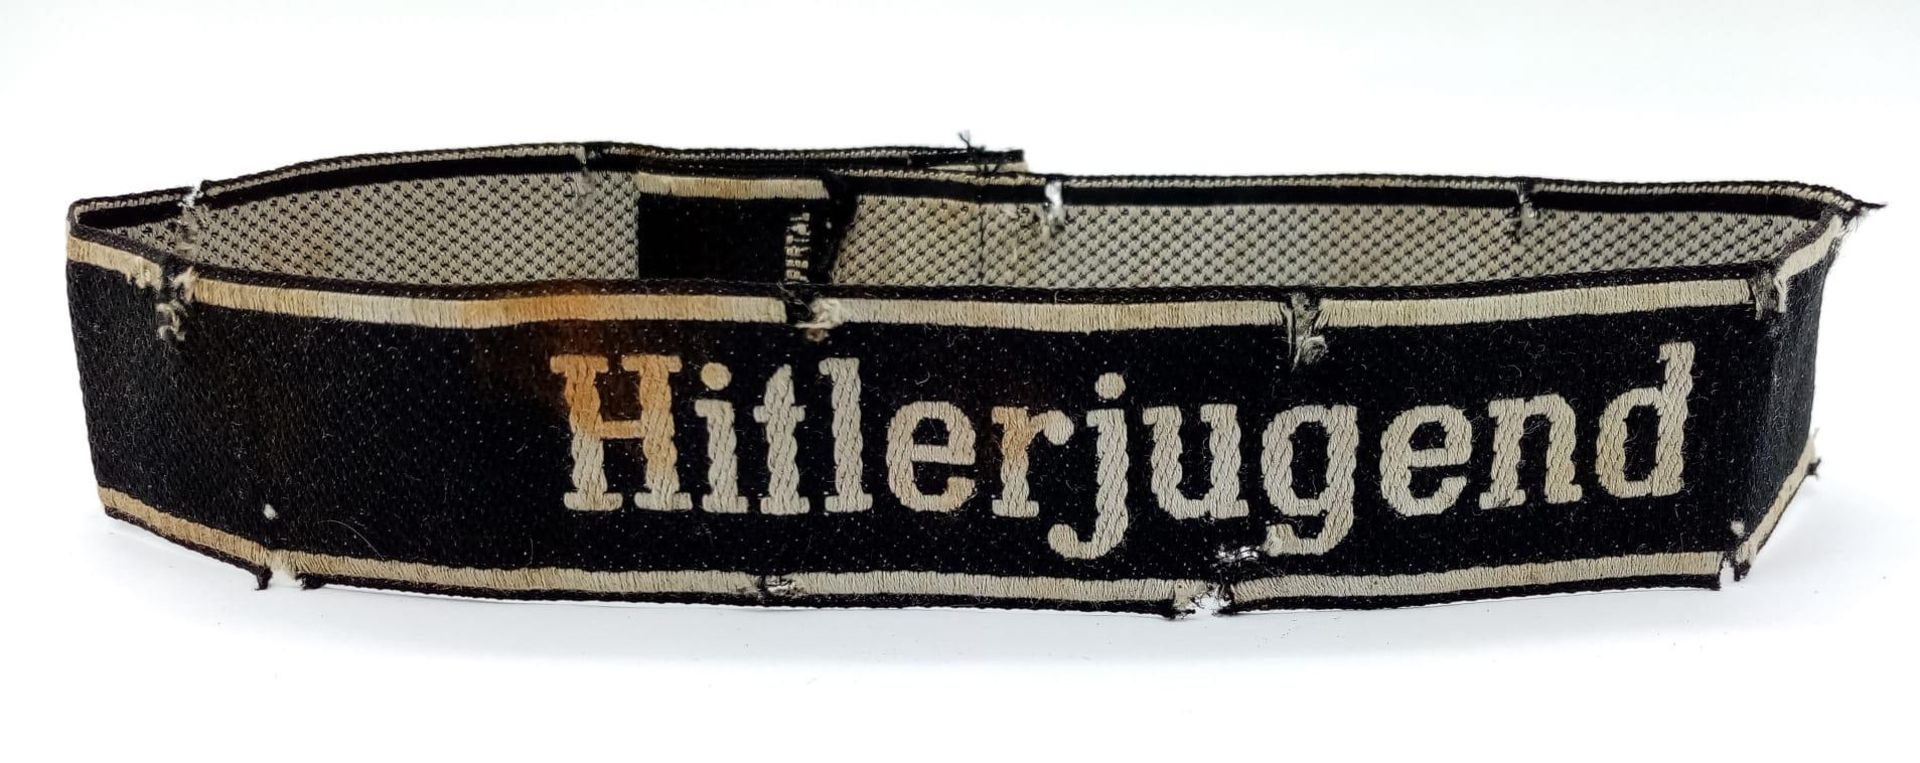 3rd Reich 12th SS Panzer “Hitler Youth” Cuff Title. Marked “Bevo Wuppental” Passes the black light